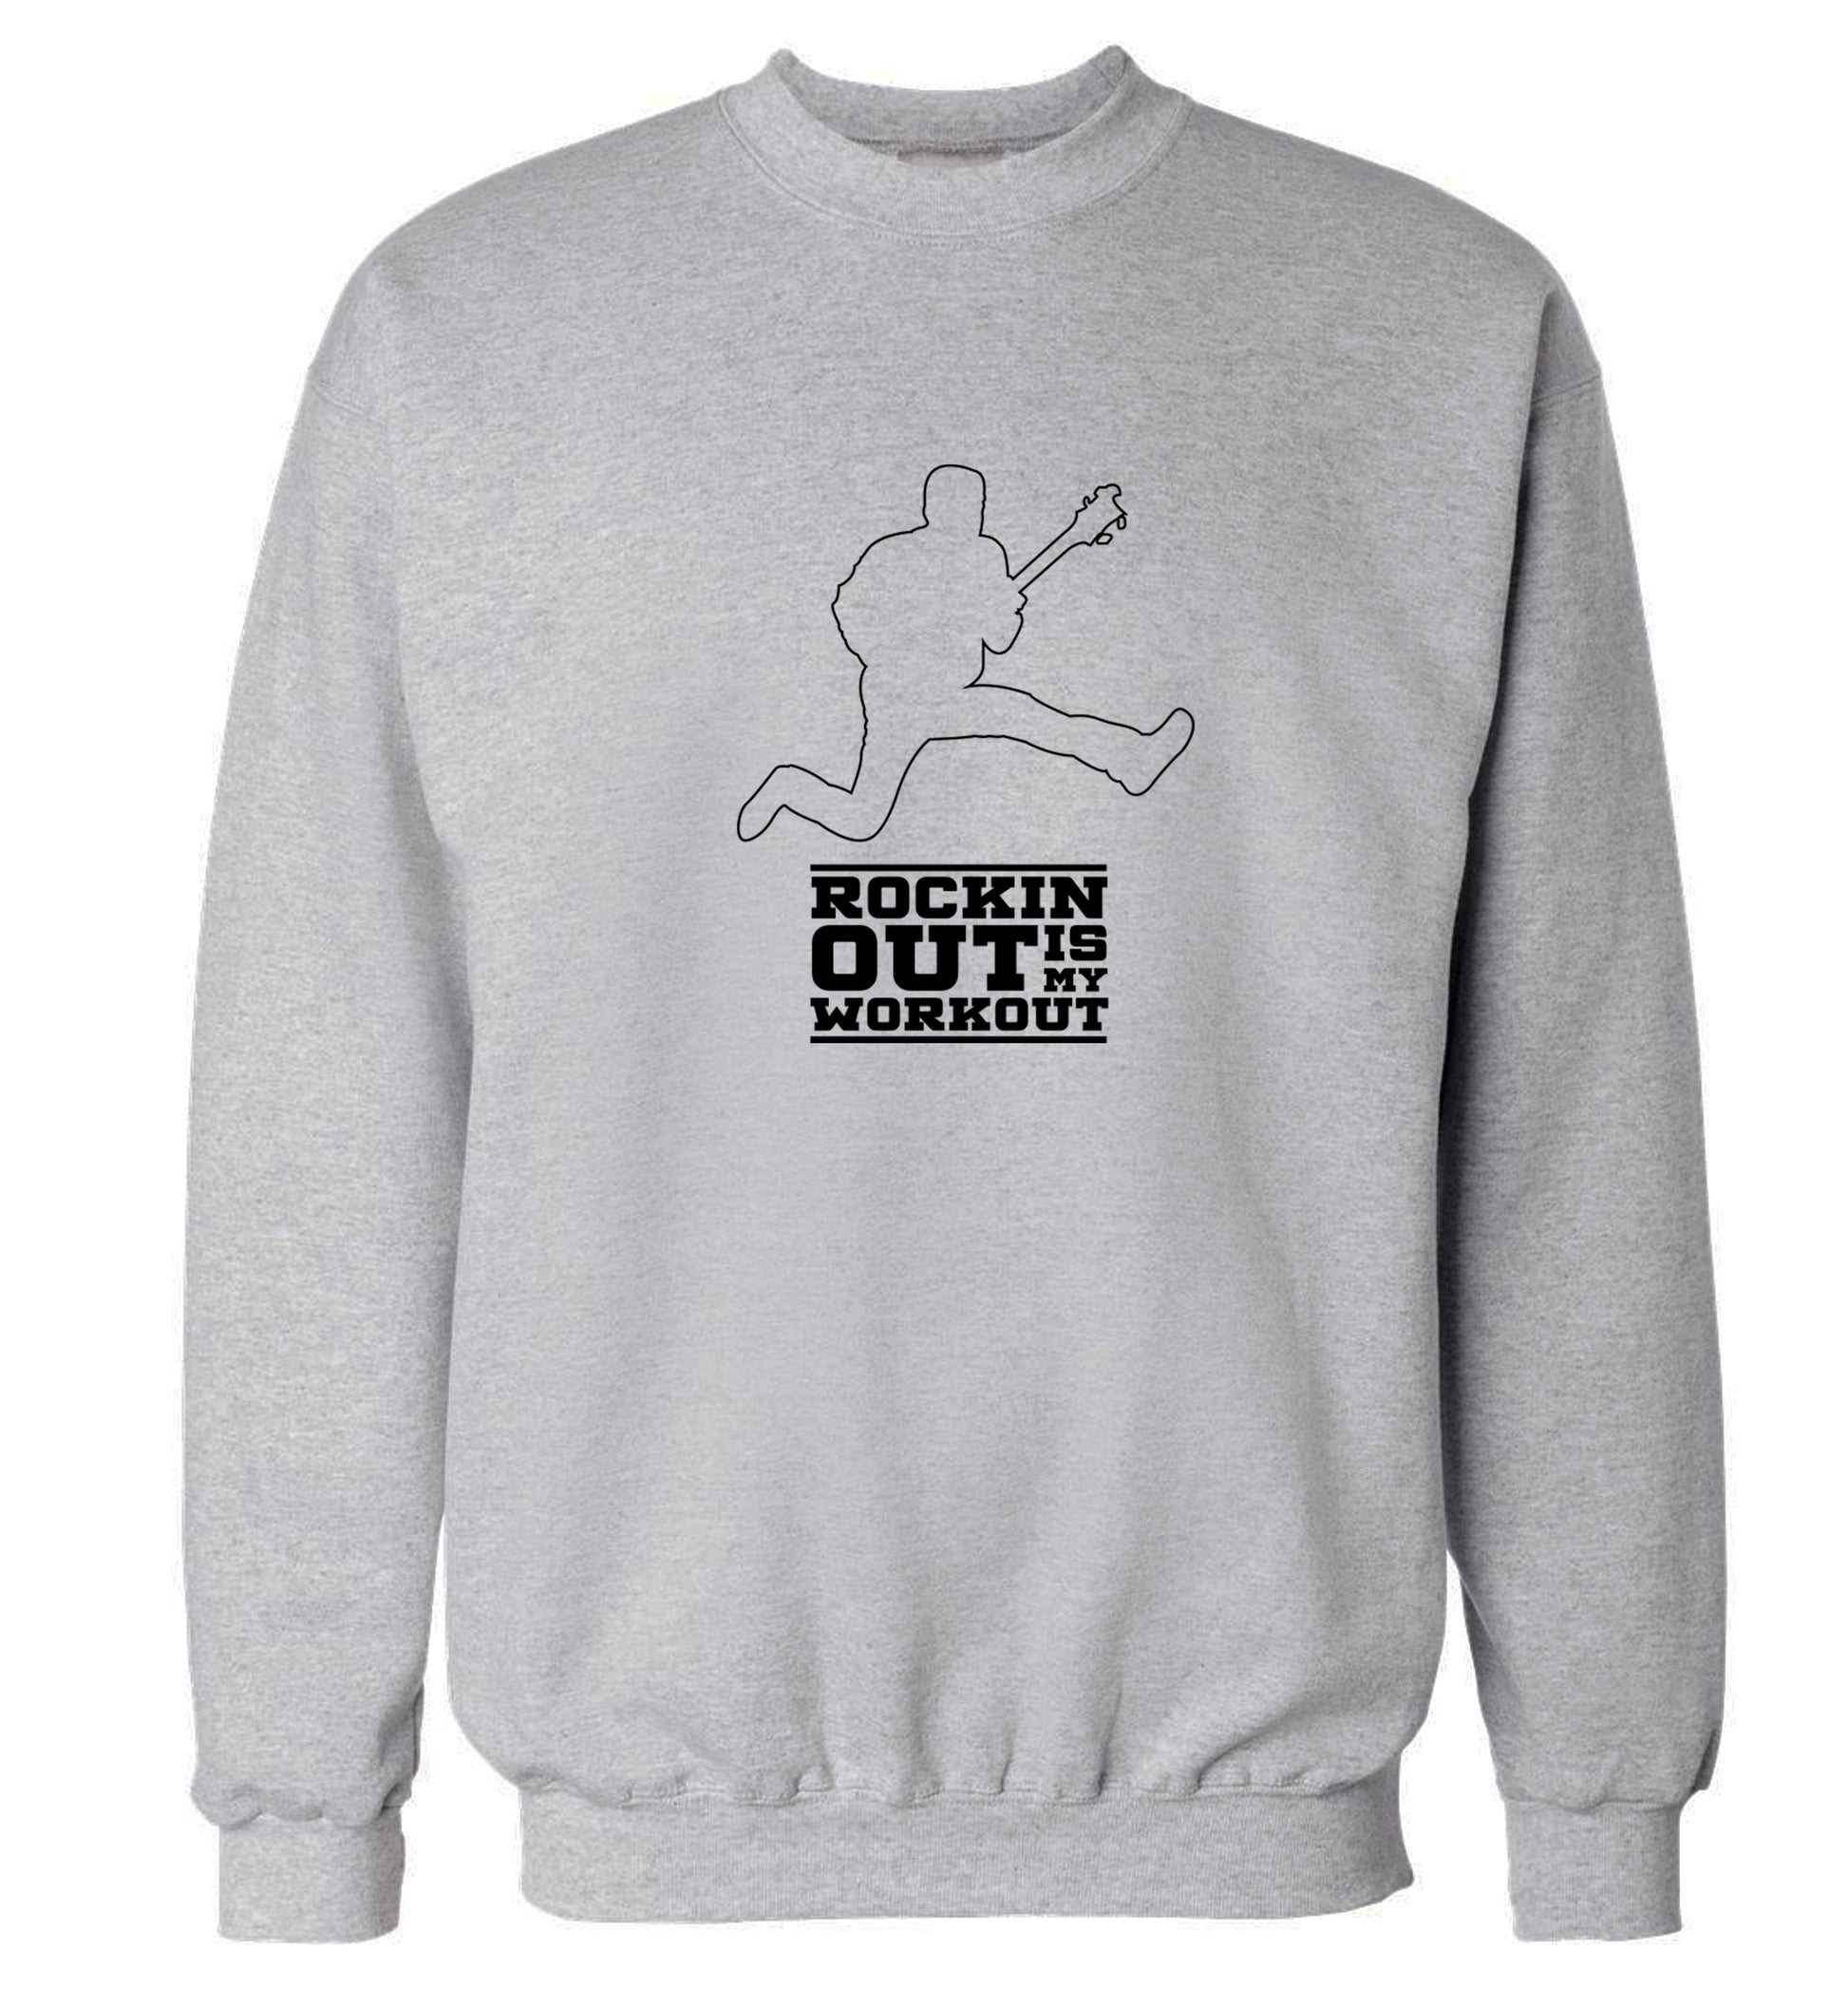 Rockin out is my workout 2 Adult's unisex grey Sweater 2XL